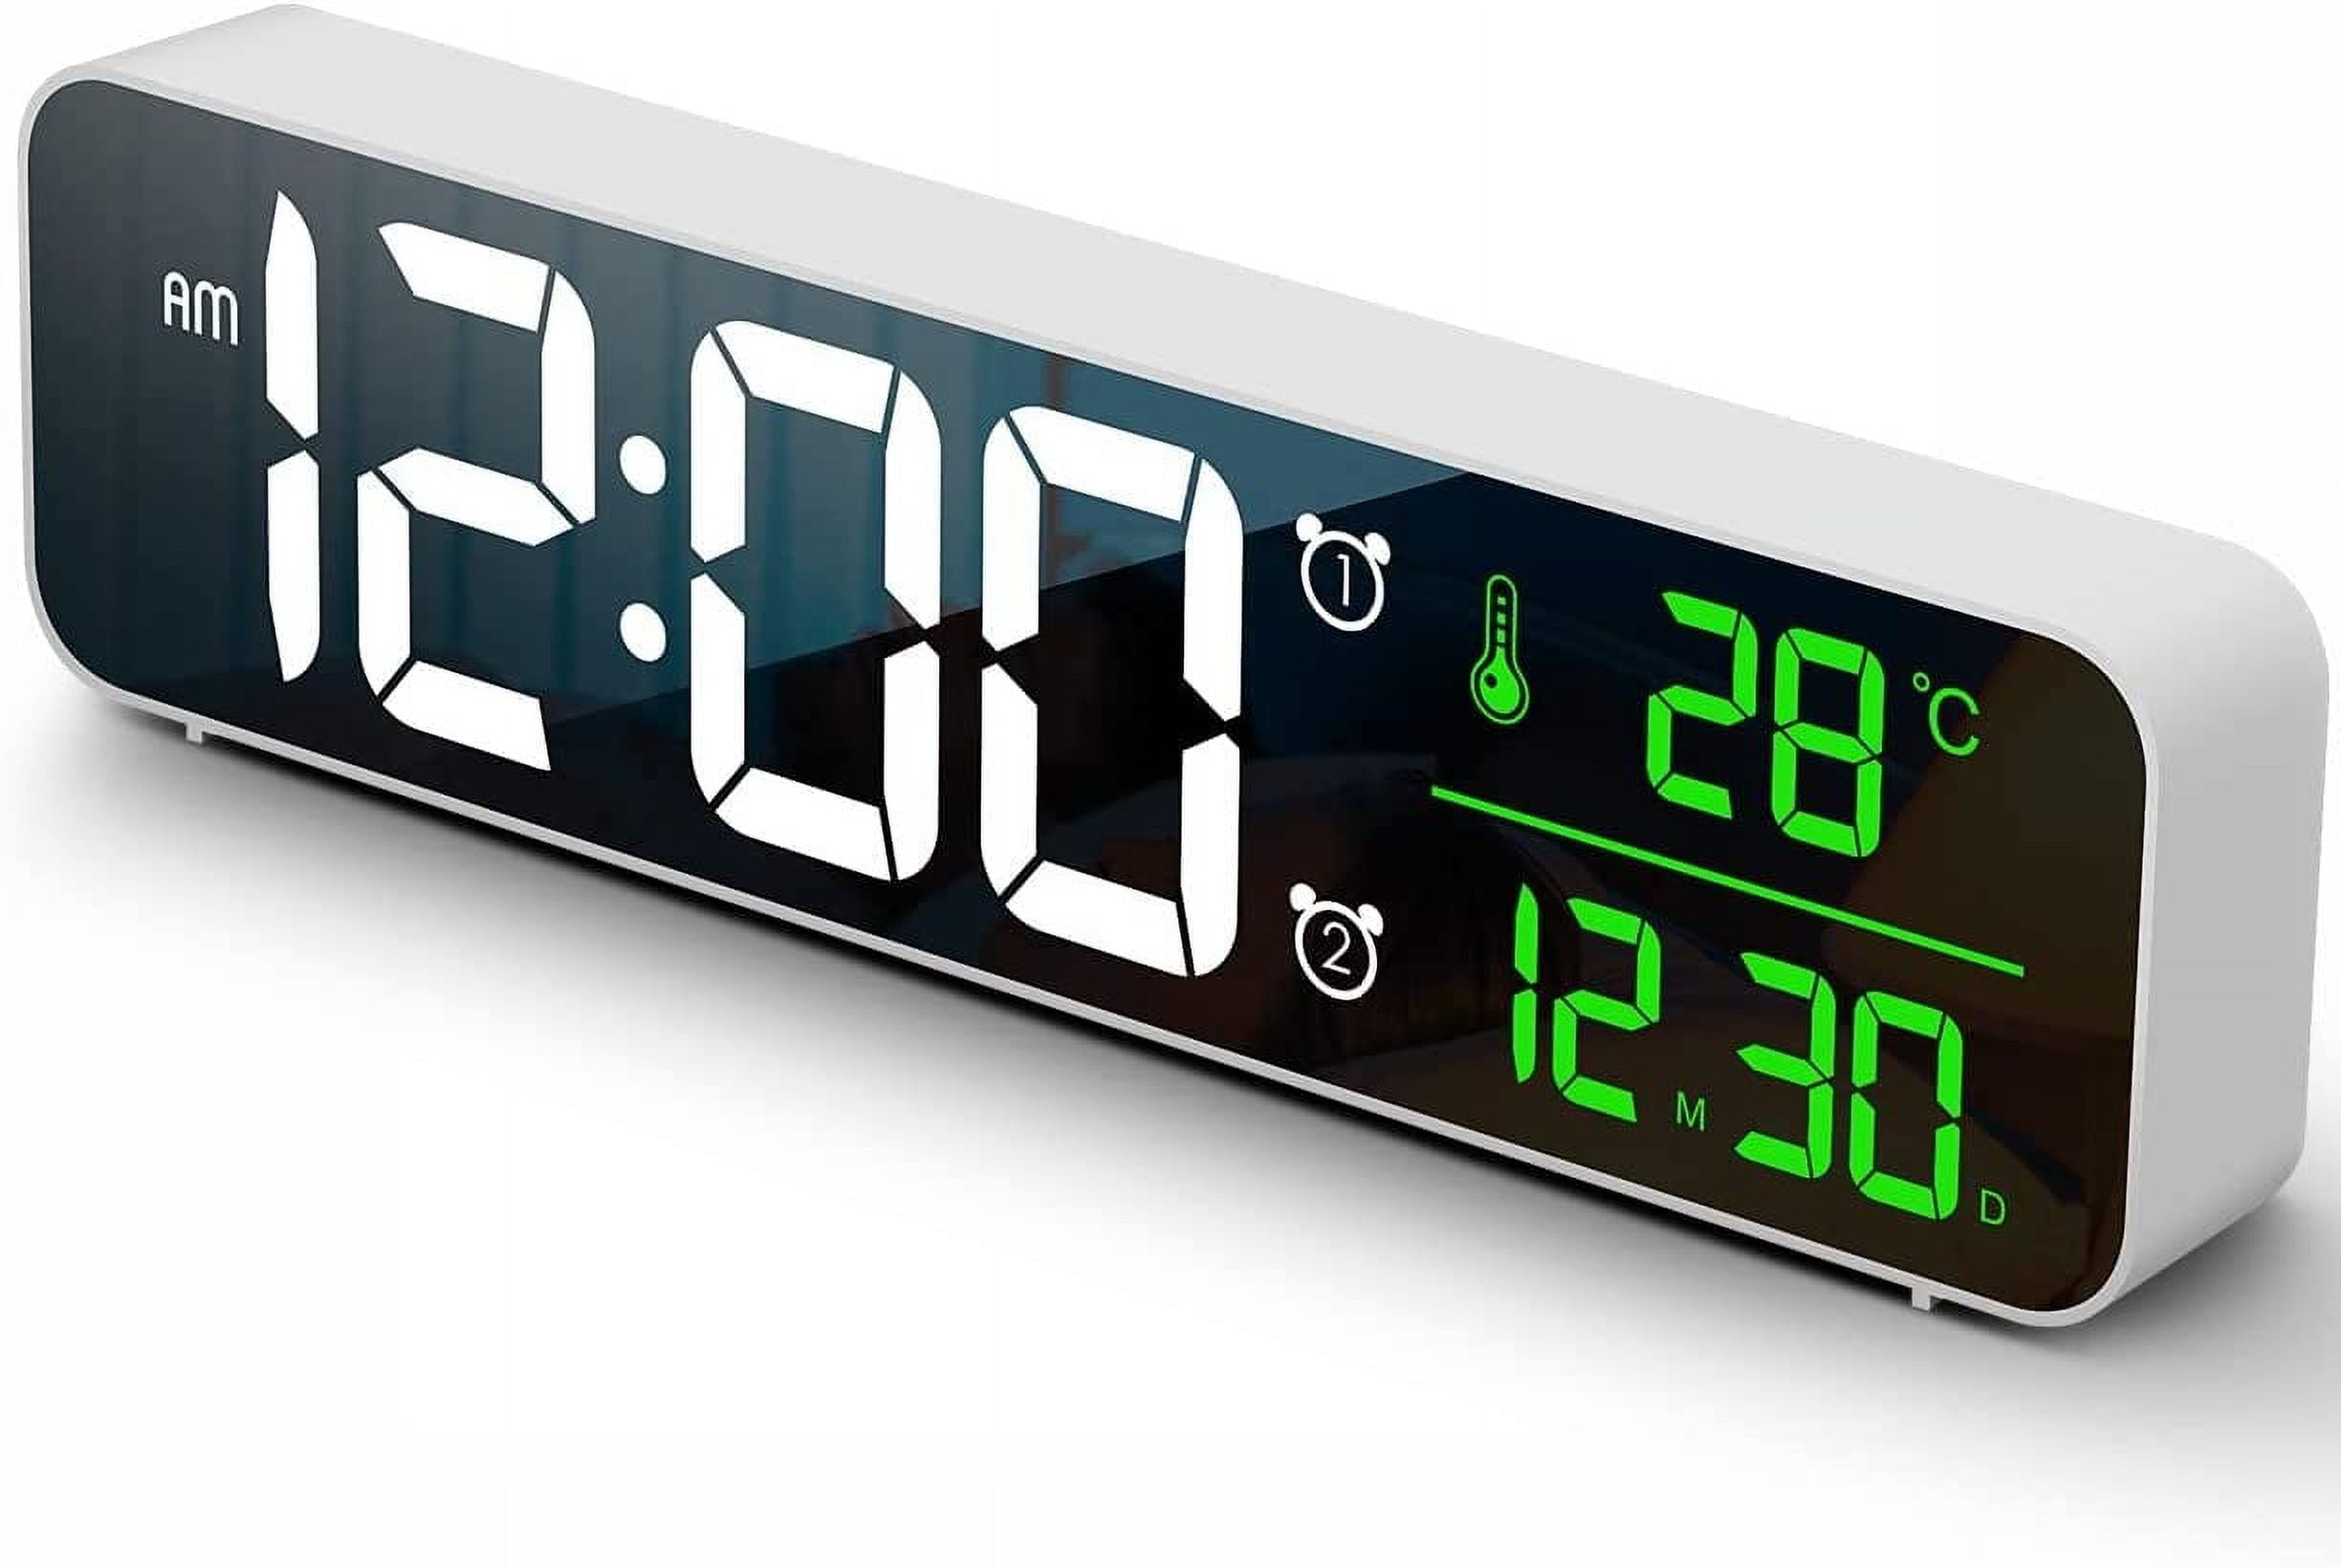 Digital Clock Large Display Alarm Clock for Living Room Office Bedroom  Decor LED Electronic Date Temp Display Wall Electric Clocks Automatic  Brightness Dimmer Smart Cool Modern Desk Accessories Black 